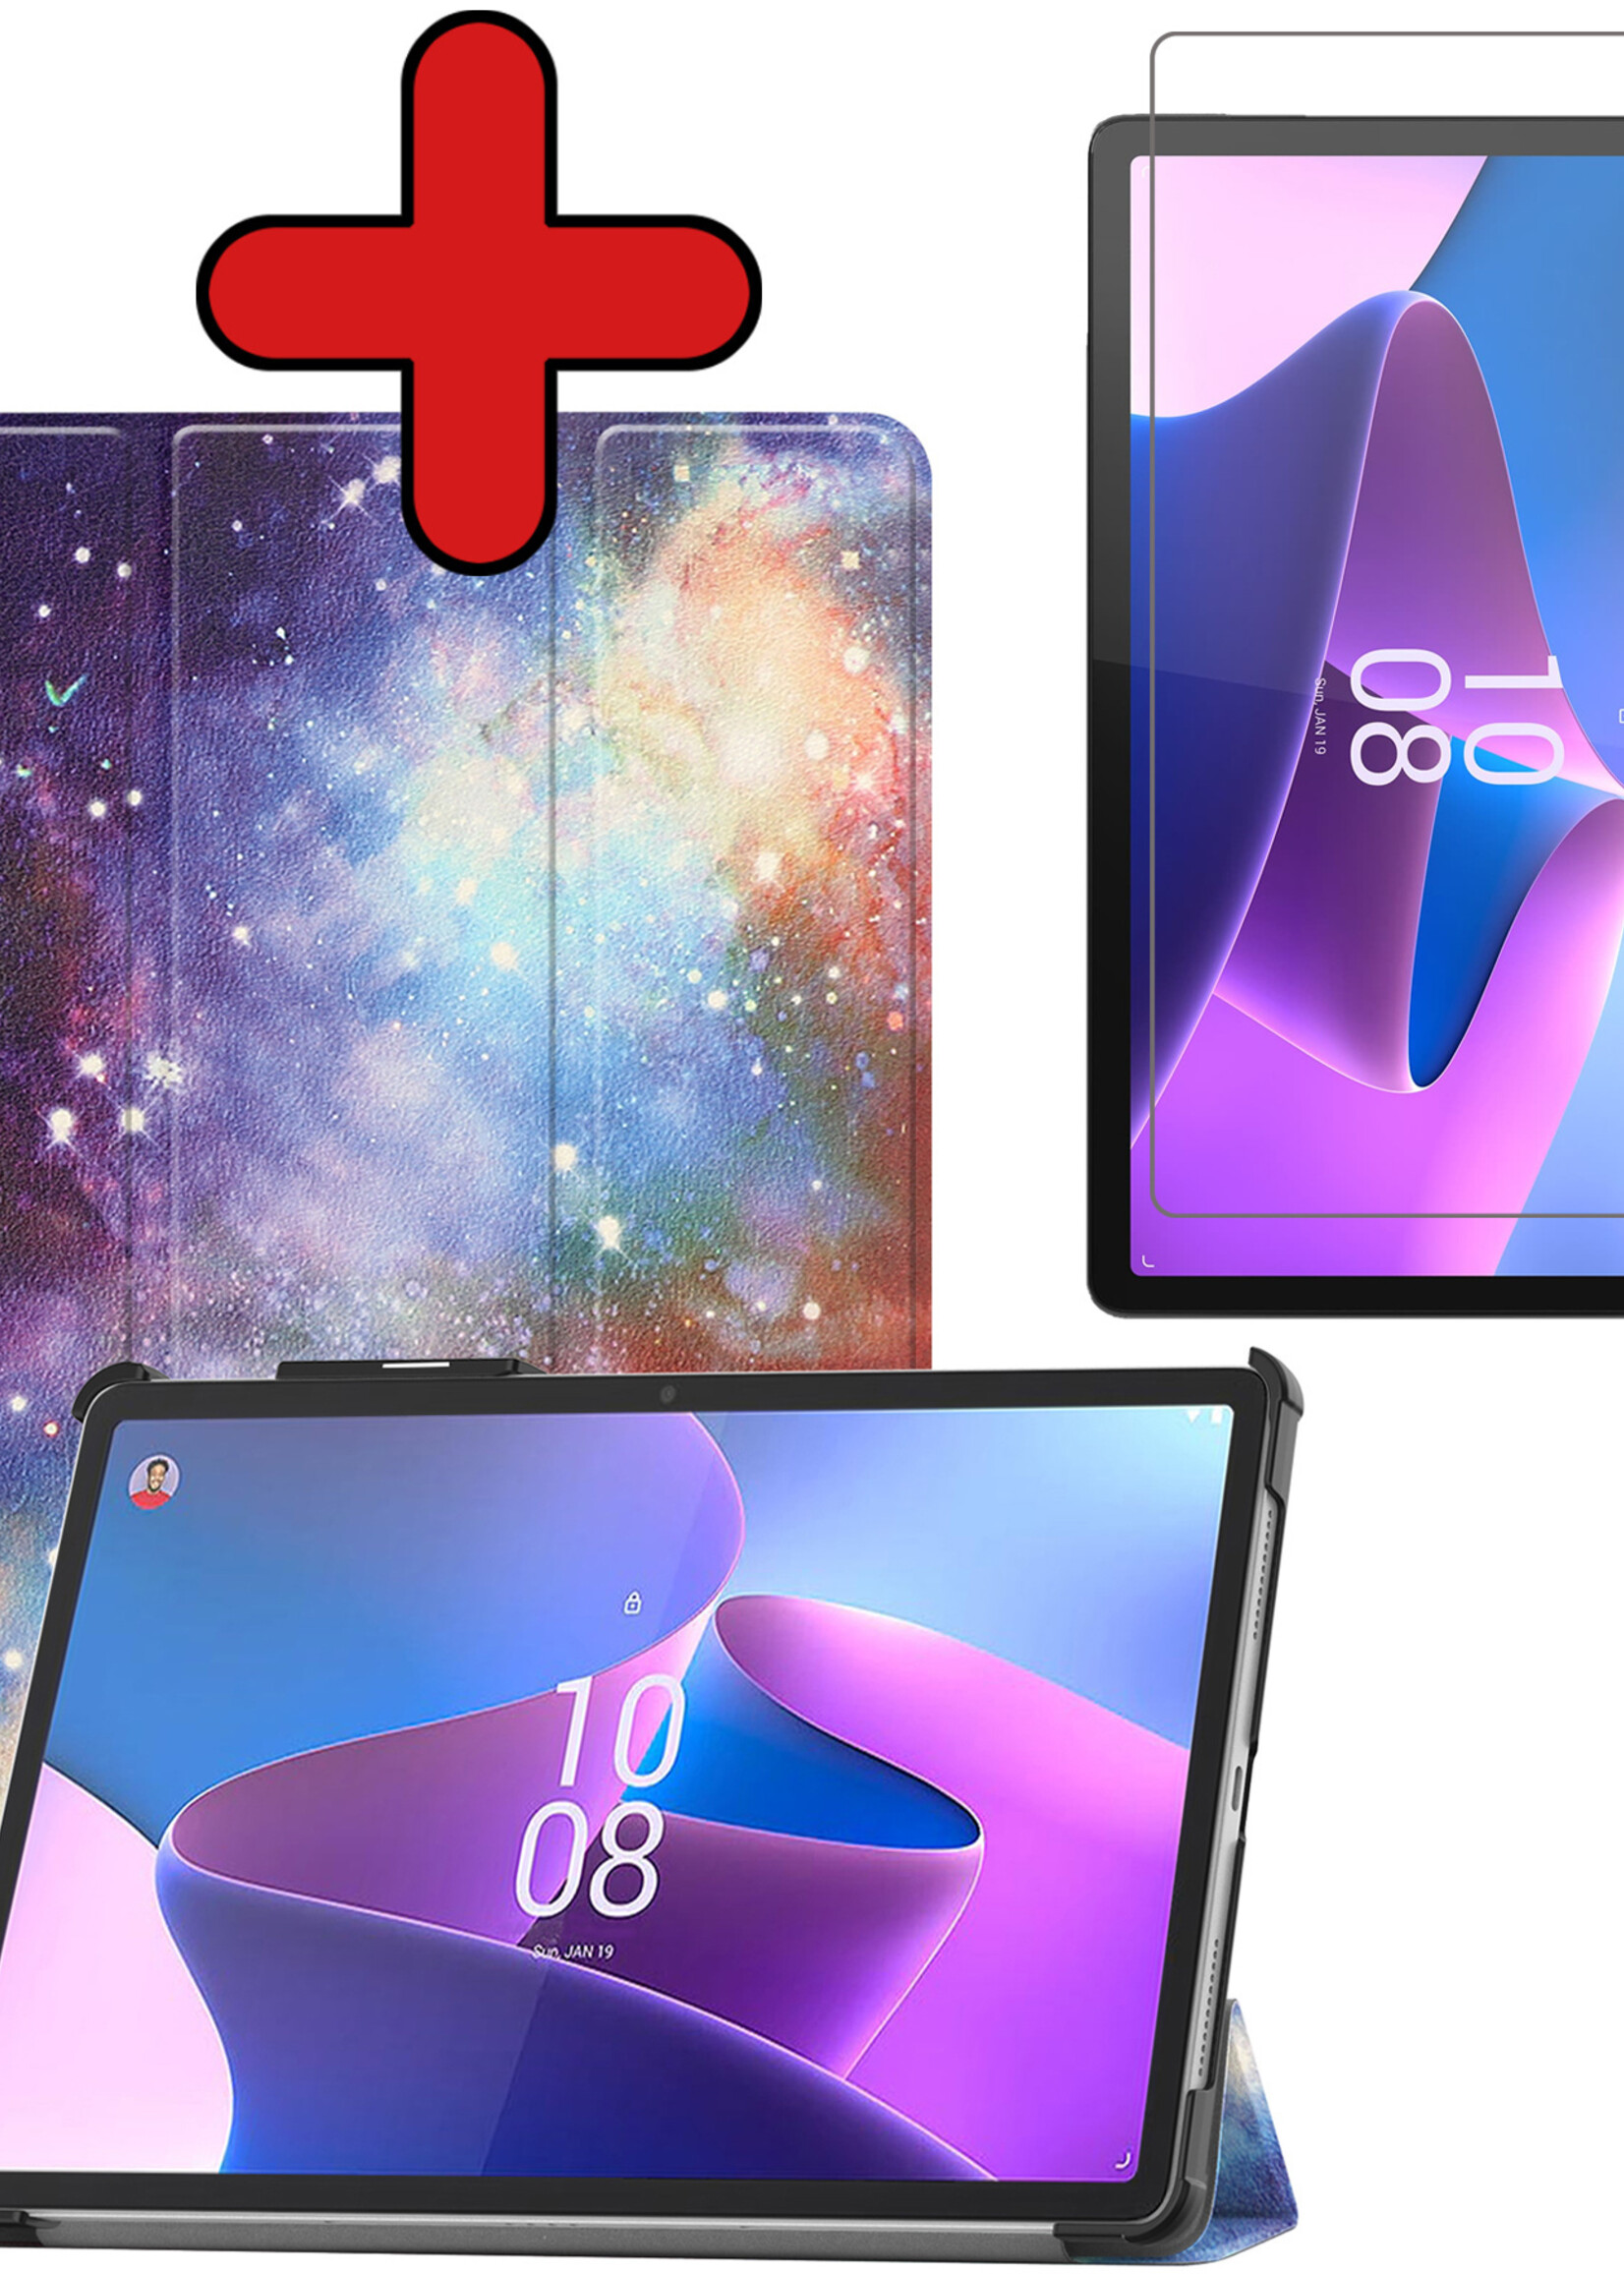 BTH Hoes Geschikt voor Lenovo Tab P11 Pro Hoes Book Case Hoesje Trifold Cover Met Uitsparing Geschikt voor Lenovo Pen Met Screenprotector - Hoesje Geschikt voor Lenovo Tab P11 Pro Hoesje Bookcase - Galaxy